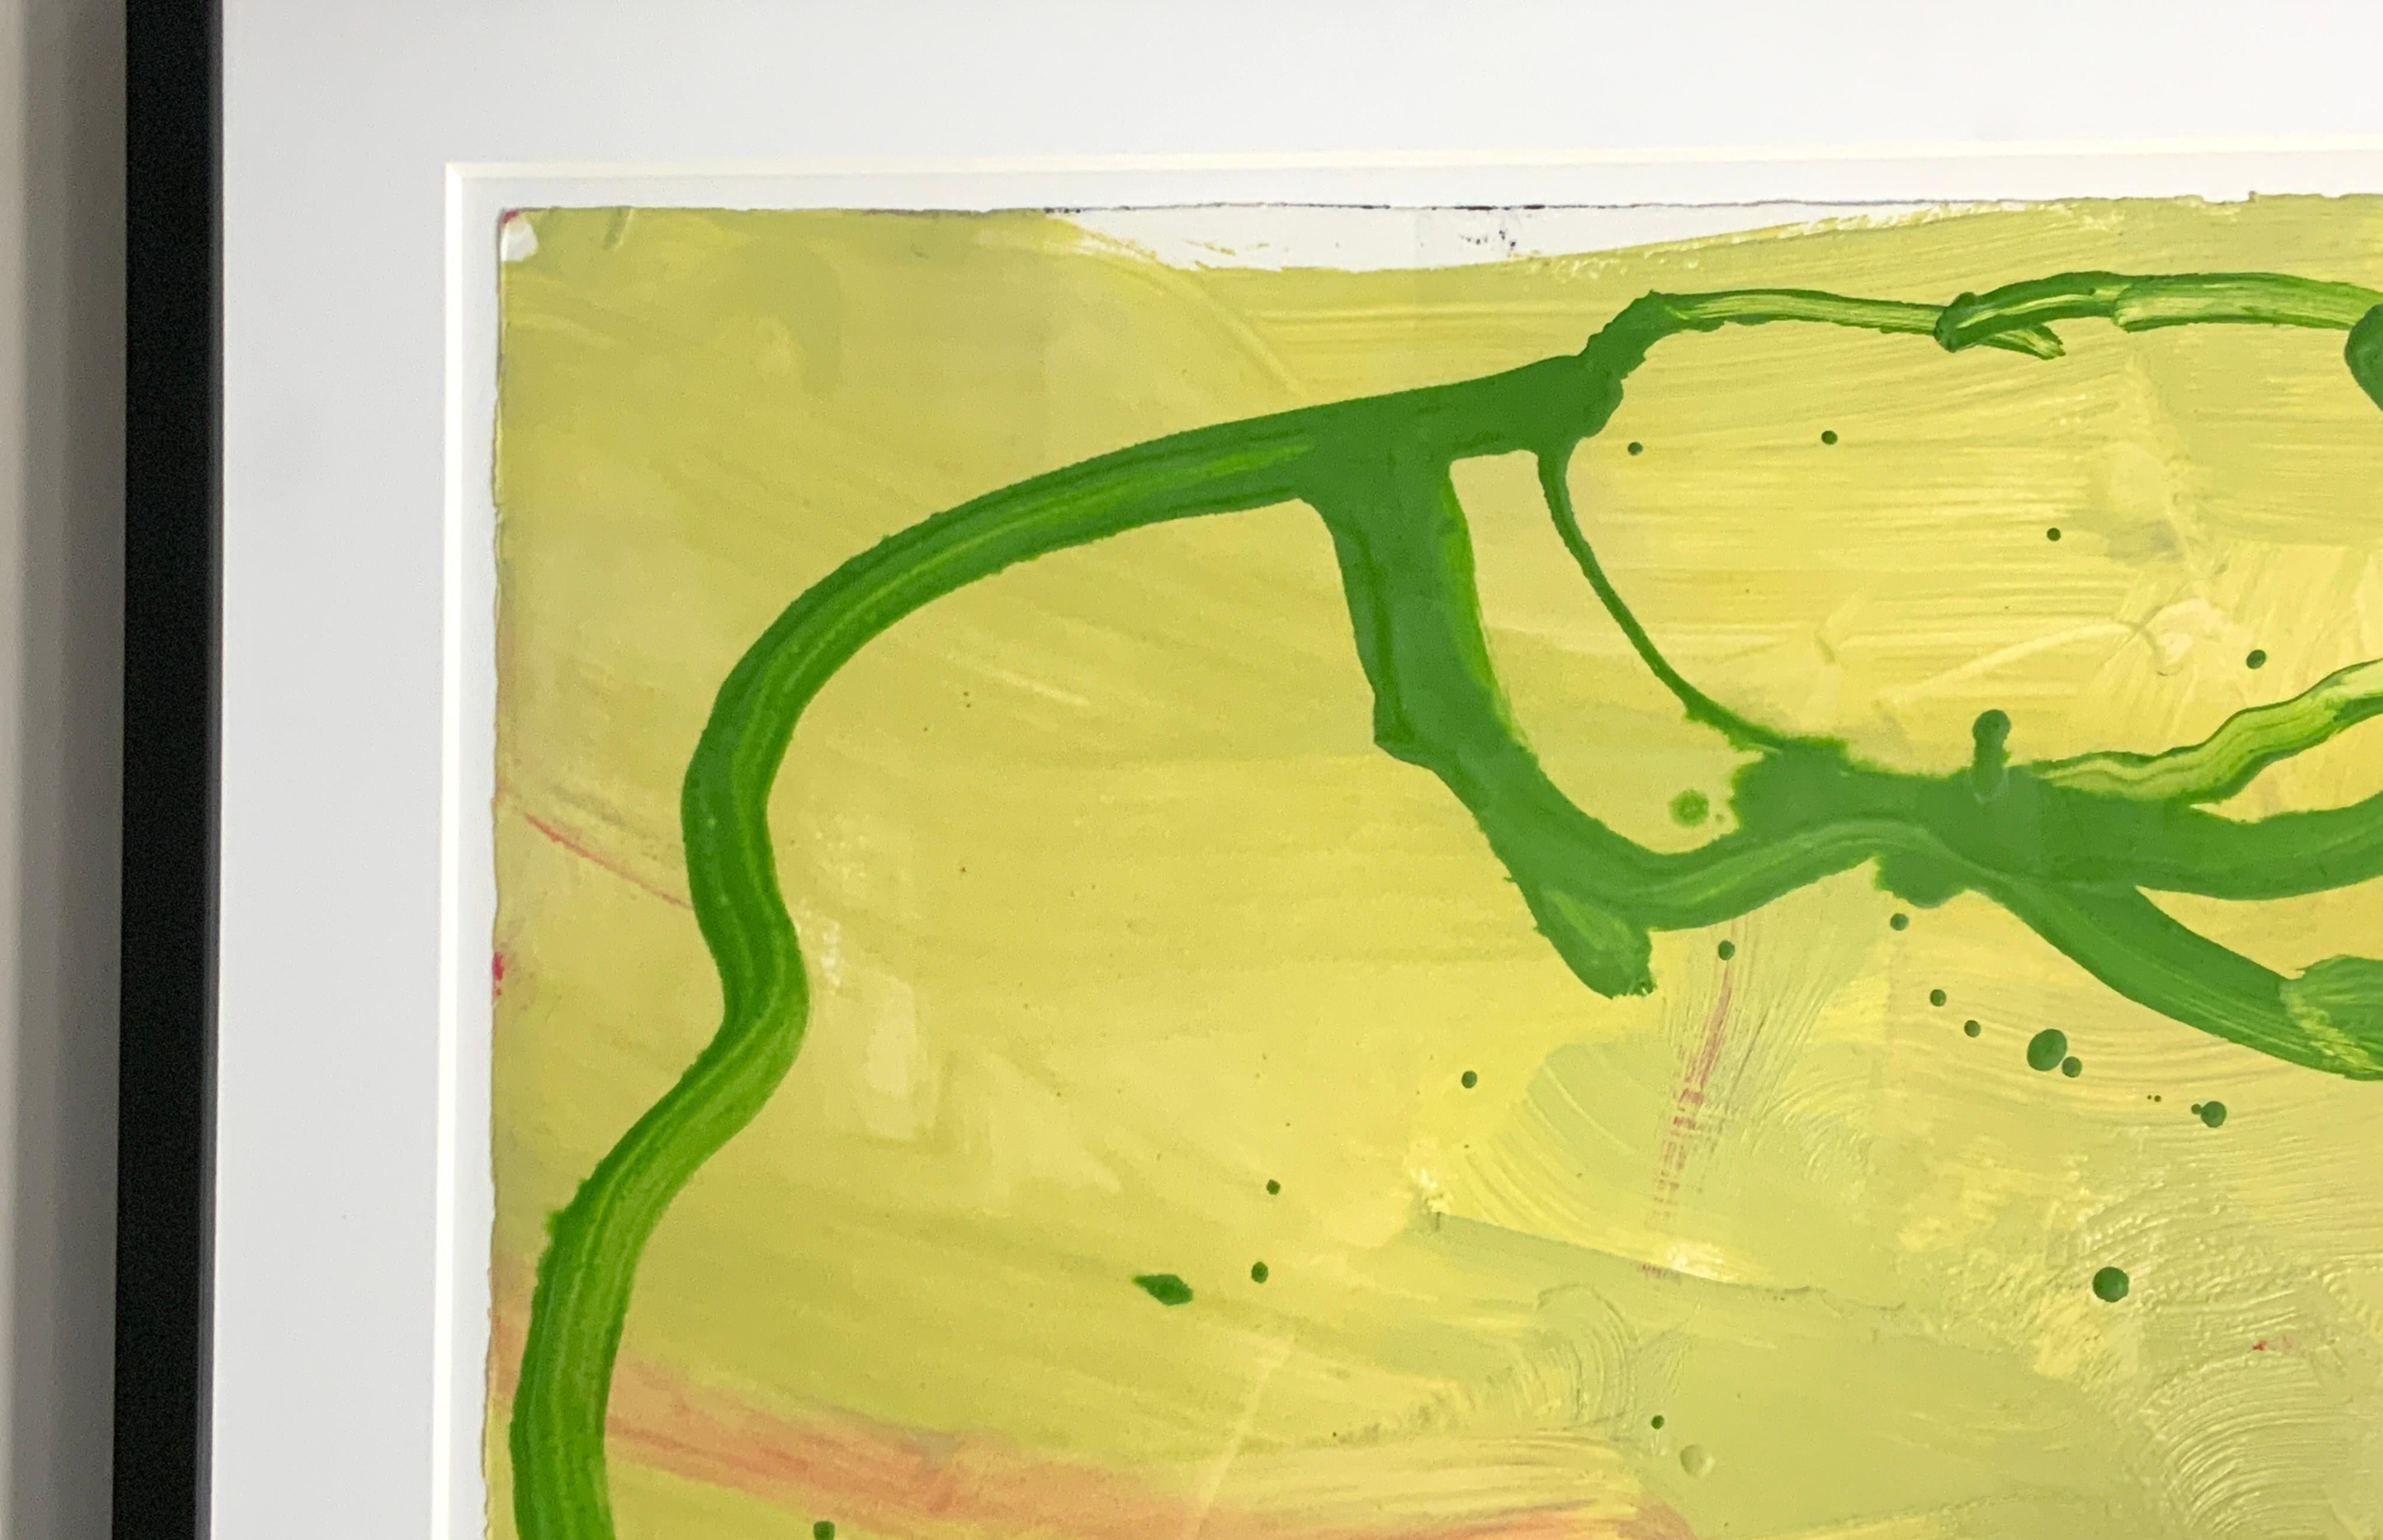 Post-Modern Gary Komarin “Untitled Green Vessel on Yellow Green”, acrylic on paper, 2000 For Sale